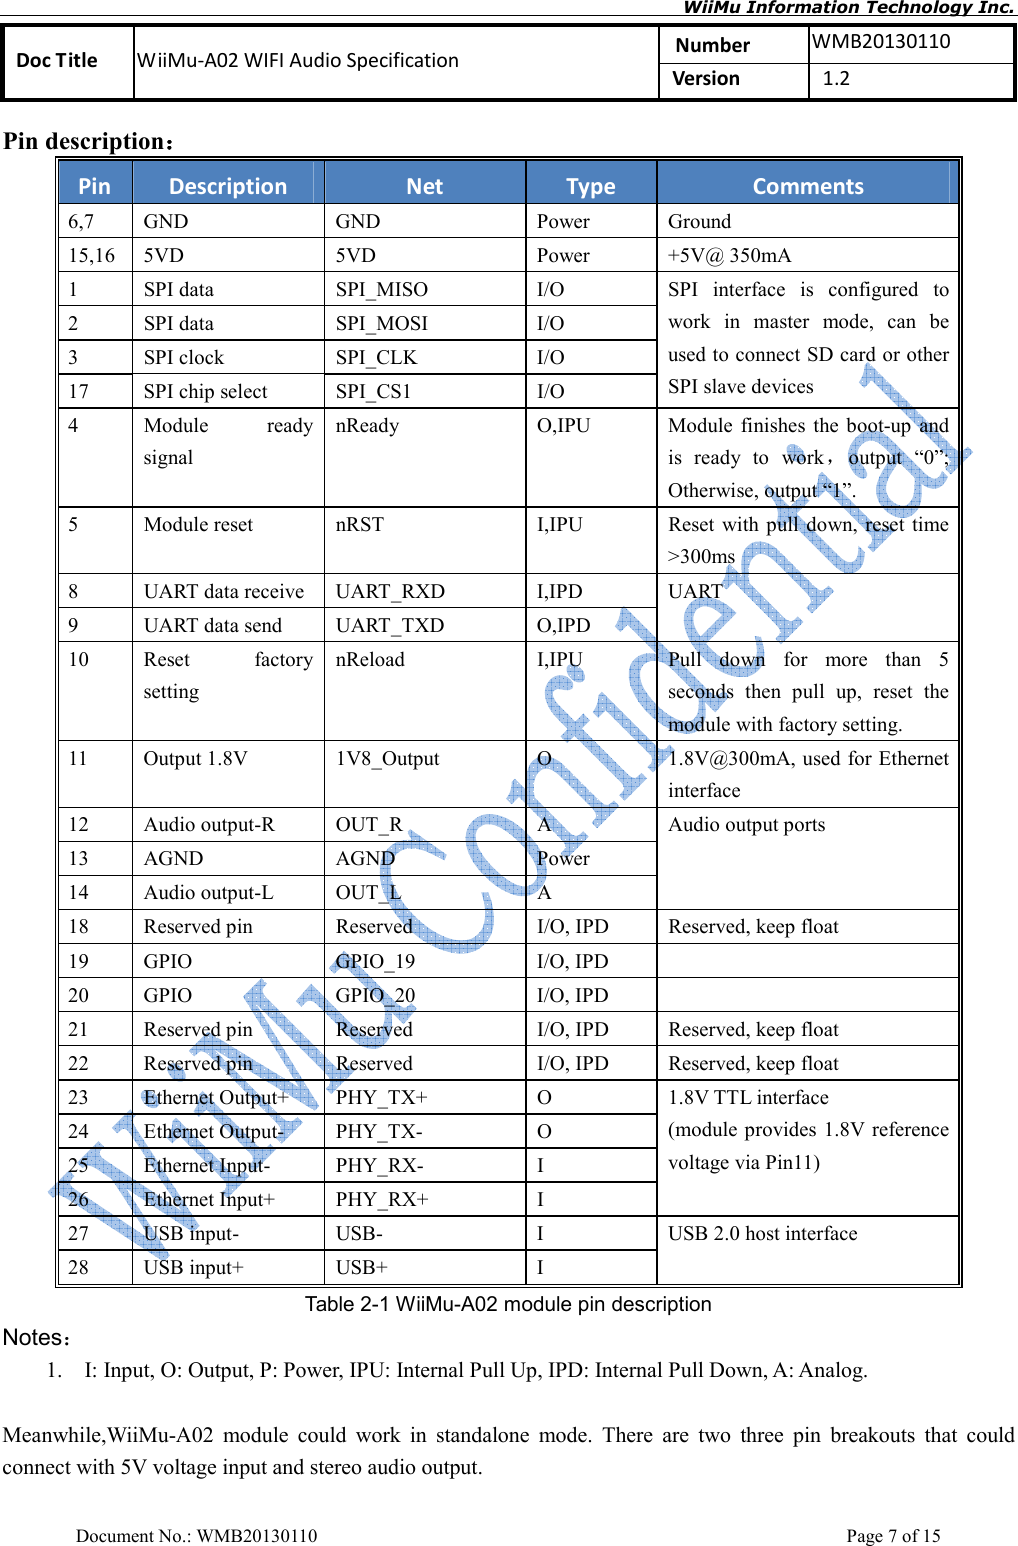       WiiMu Information Technology Inc. Number  WMB20130110 Doc Title  WiiMu-A02 WIFI Audio Specification  Version    1.2  Document No.: WMB20130110    Page 7 of 15 Pin description Pin  Description  Net  Type  Comments 6,7  GND  GND  Power  Ground 15,16 5VD  5VD    Power  +5V@ 350mA 1  SPI data  SPI_MISO  I/O 2  SPI data  SPI_MOSI  I/O 3  SPI clock  SPI_CLK  I/O 17  SPI chip select  SPI_CS1  I/O SPI  interface  is  configured  to work  in  master  mode,  can  be used to connect SD card or other SPI slave devices 4  Module  ready signal nReady  O,IPU  Module  finishes  the  boot-up  and is  ready  to  workoutput  “0”; Otherwise, output “1”. 5  Module reset  nRST  I,IPU  Reset  with pull down, reset  time &gt;300ms 8  UART data receive  UART_RXD  I,IPD 9  UART data send    UART_TXD  O,IPD UART   10  Reset  factory setting nReload  I,IPU  Pull  down  for  more  than  5 seconds  then  pull  up,  reset  the module with factory setting.   11  Output 1.8V  1V8_Output  O  1.8V@300mA, used for Ethernet interface 12  Audio output-R  OUT_R  A 13  AGND  AGND  Power 14  Audio output-L  OUT_L  A Audio output ports   18  Reserved pin  Reserved  I/O, IPD  Reserved, keep float 19  GPIO  GPIO_19  I/O, IPD   20  GPIO  GPIO_20  I/O, IPD   21  Reserved pin  Reserved  I/O, IPD  Reserved, keep float 22  Reserved pin  Reserved  I/O, IPD  Reserved, keep float 23  Ethernet Output+  PHY_TX+  O 24  Ethernet Output-  PHY_TX-  O 25  Ethernet Input-  PHY_RX-  I 26  Ethernet Input+  PHY_RX+  I 1.8V TTL interface (module provides 1.8V reference voltage via Pin11) 27  USB input-  USB-  I 28  USB input+  USB+  I USB 2.0 host interface   Table 2-1 WiiMu-A02 module pin description Notes 1.    I: Input, O: Output, P: Power, IPU: Internal Pull Up, IPD: Internal Pull Down, A: Analog.      Meanwhile,WiiMu-A02  module  could  work  in  standalone  mode.  There  are  two  three  pin  breakouts  that  could connect with 5V voltage input and stereo audio output. 